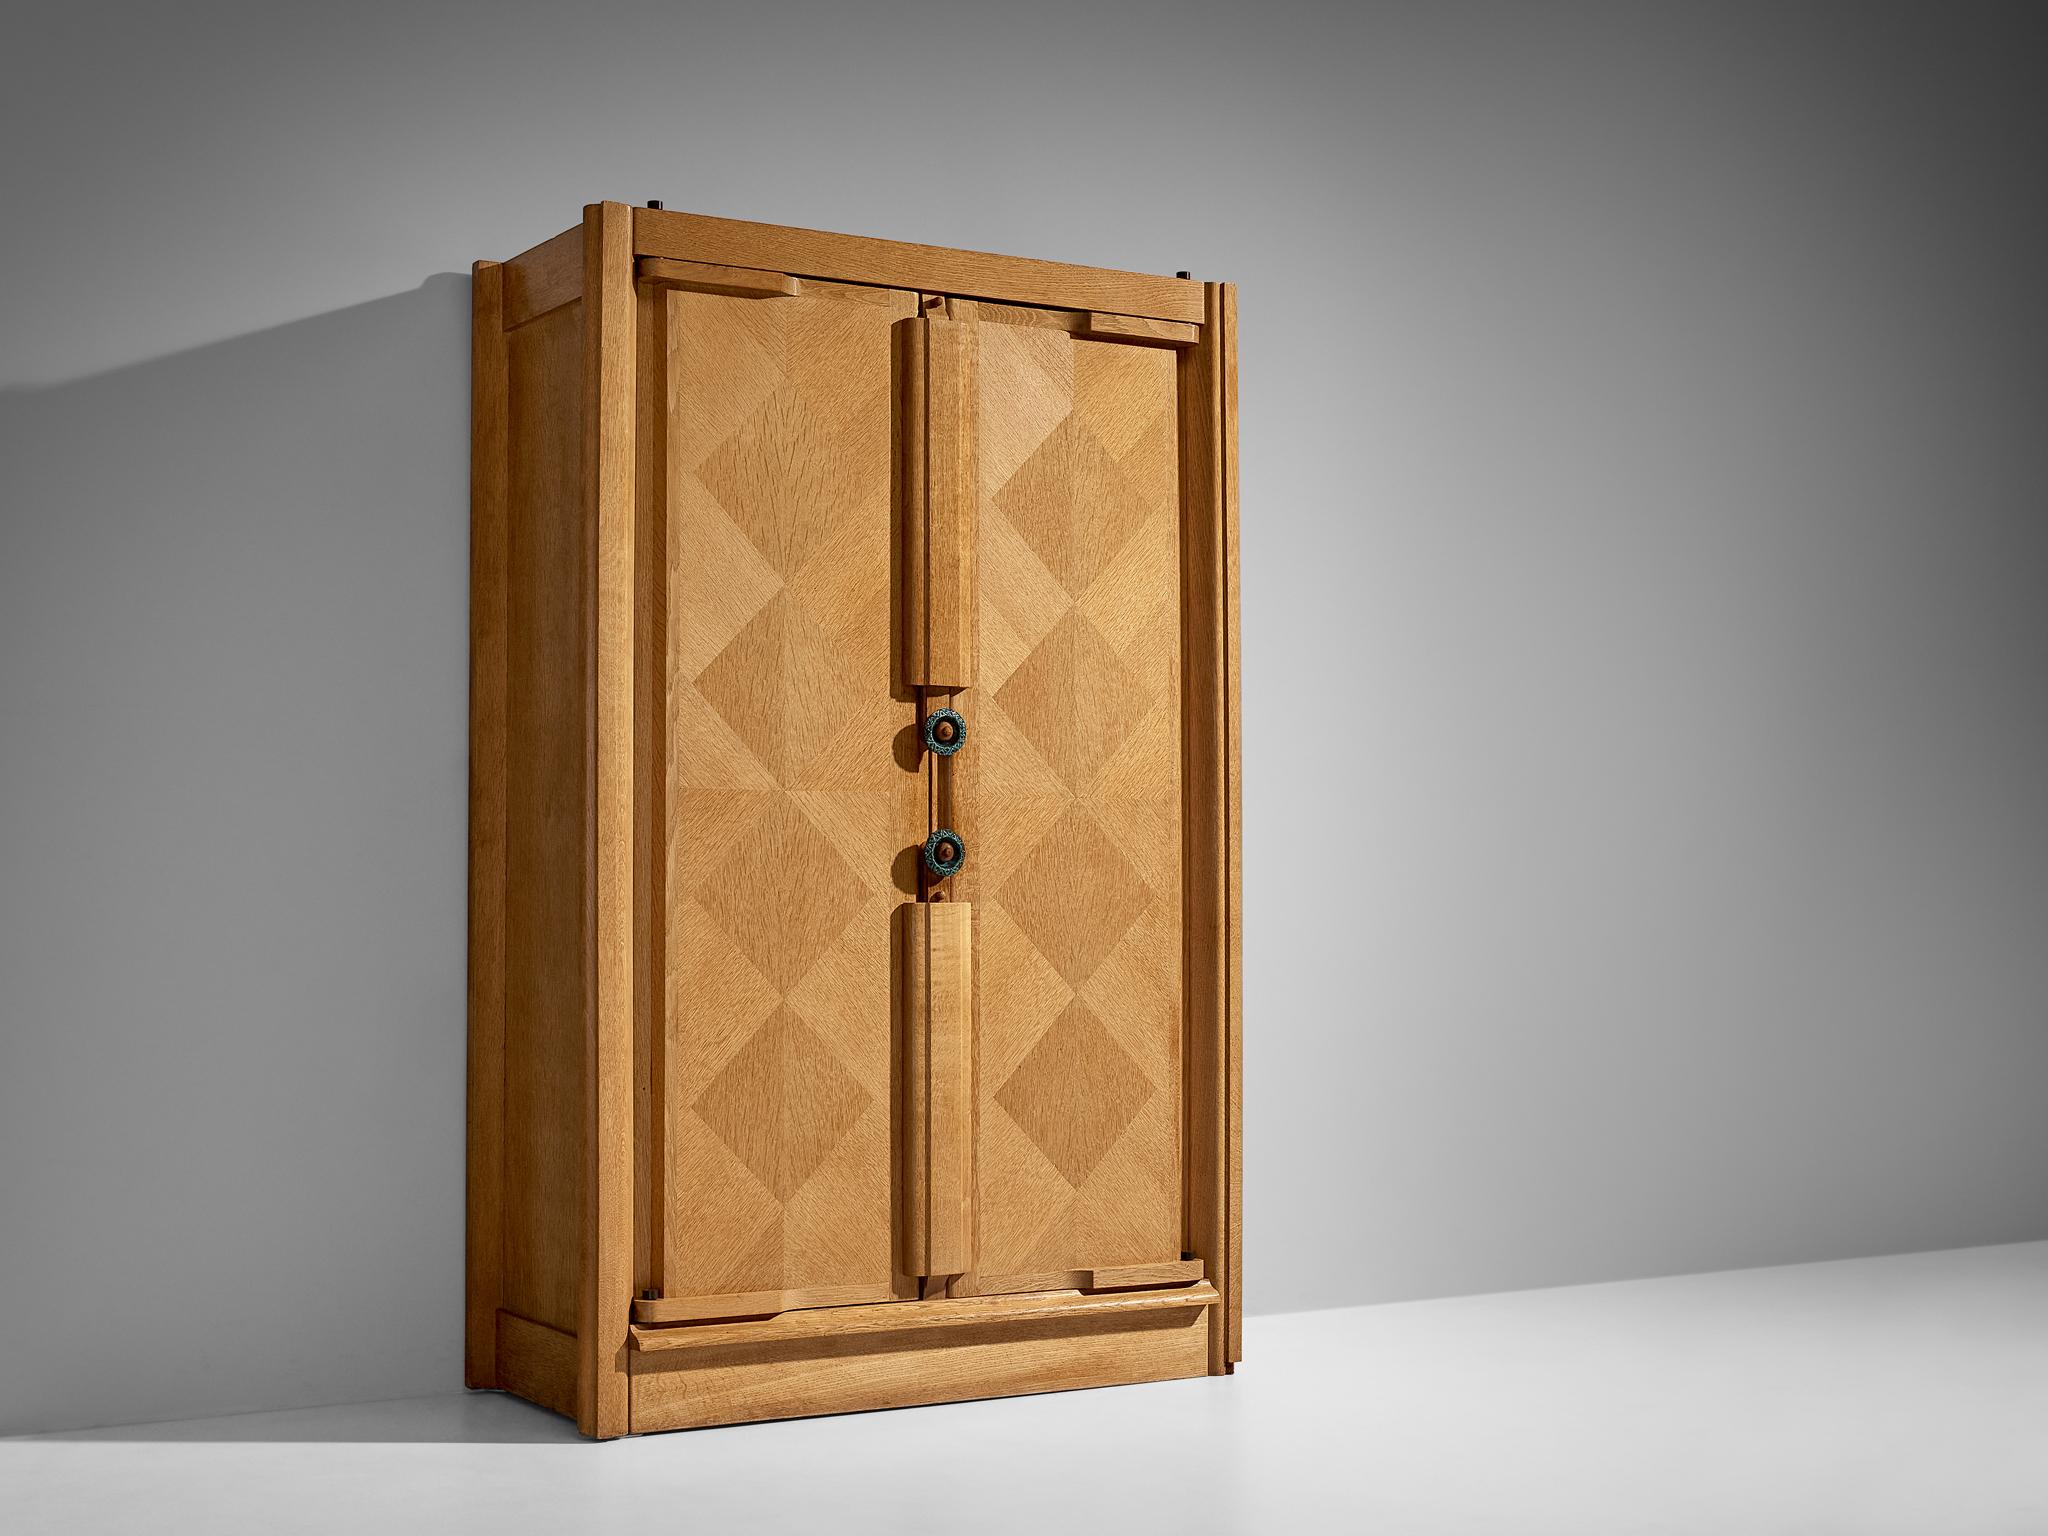 Guillerme et Chambron for Votre Maison, cabinet, oak, France, 1960s

This cabinet or case piece is designed by Guillerme and Chambron and features a front with beautiful geometric oak inlays, which is characteristic for the French designer duo. The